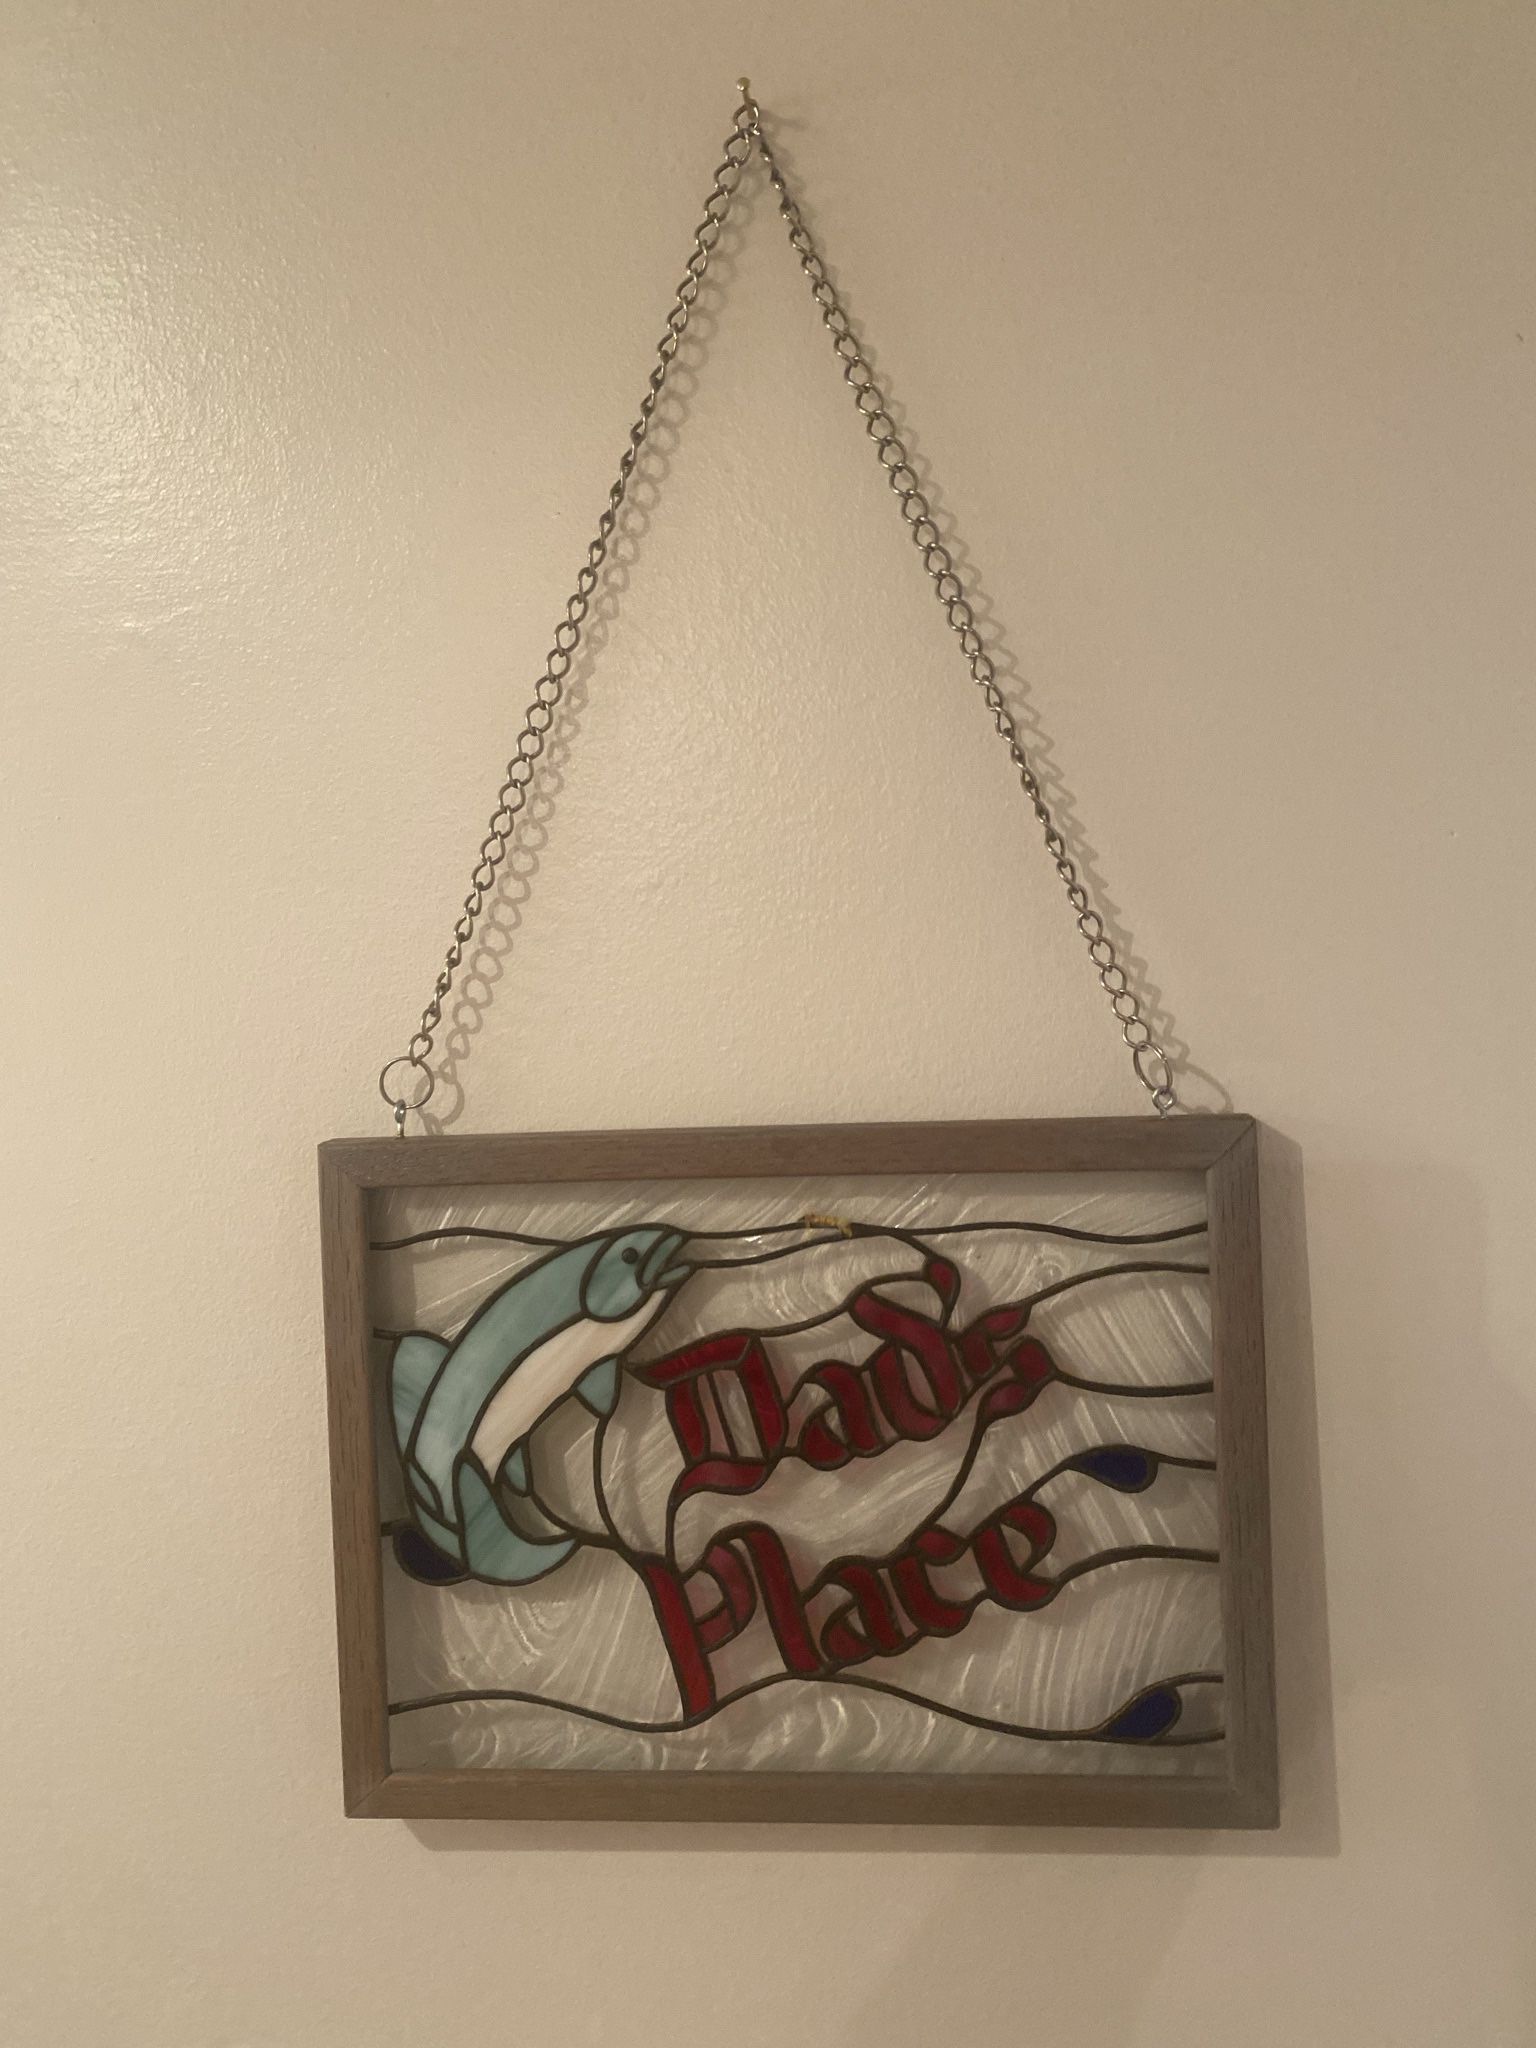 Dads Place- Custom Stained Glass Fish & Hook 15"FLY FISHING-